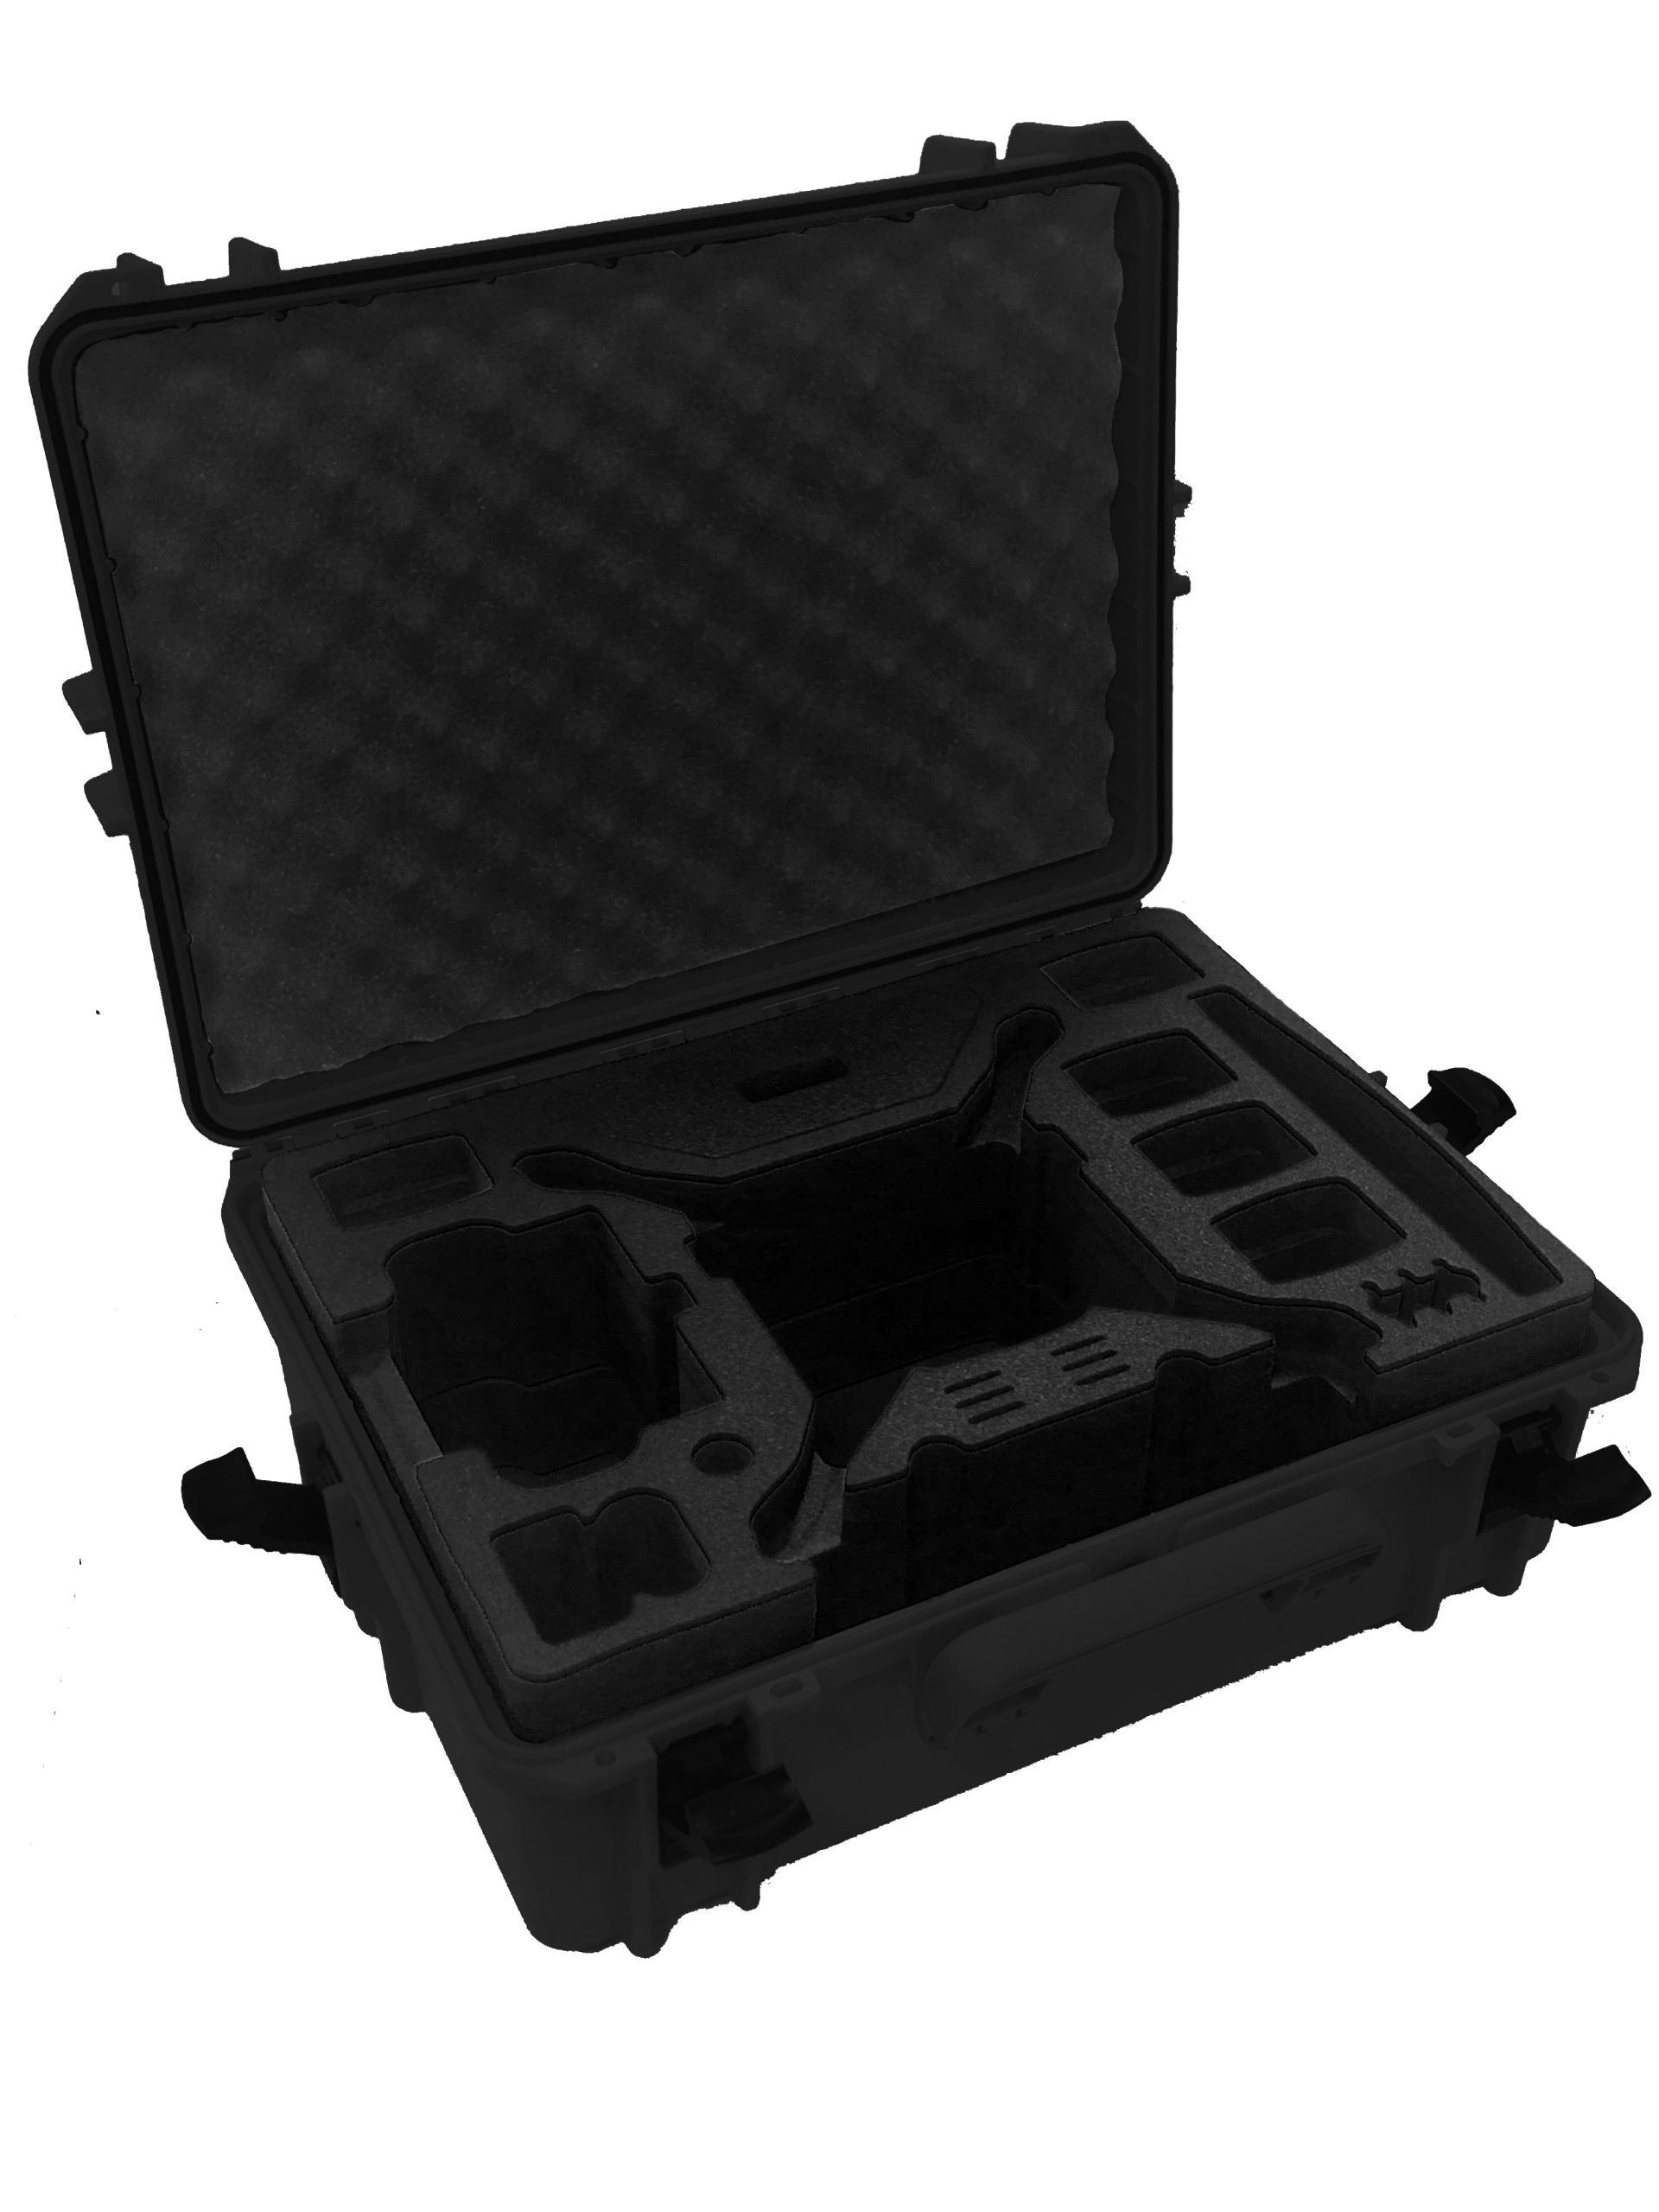 MAX505 IP67 Rated Phantom 4 Drone Case